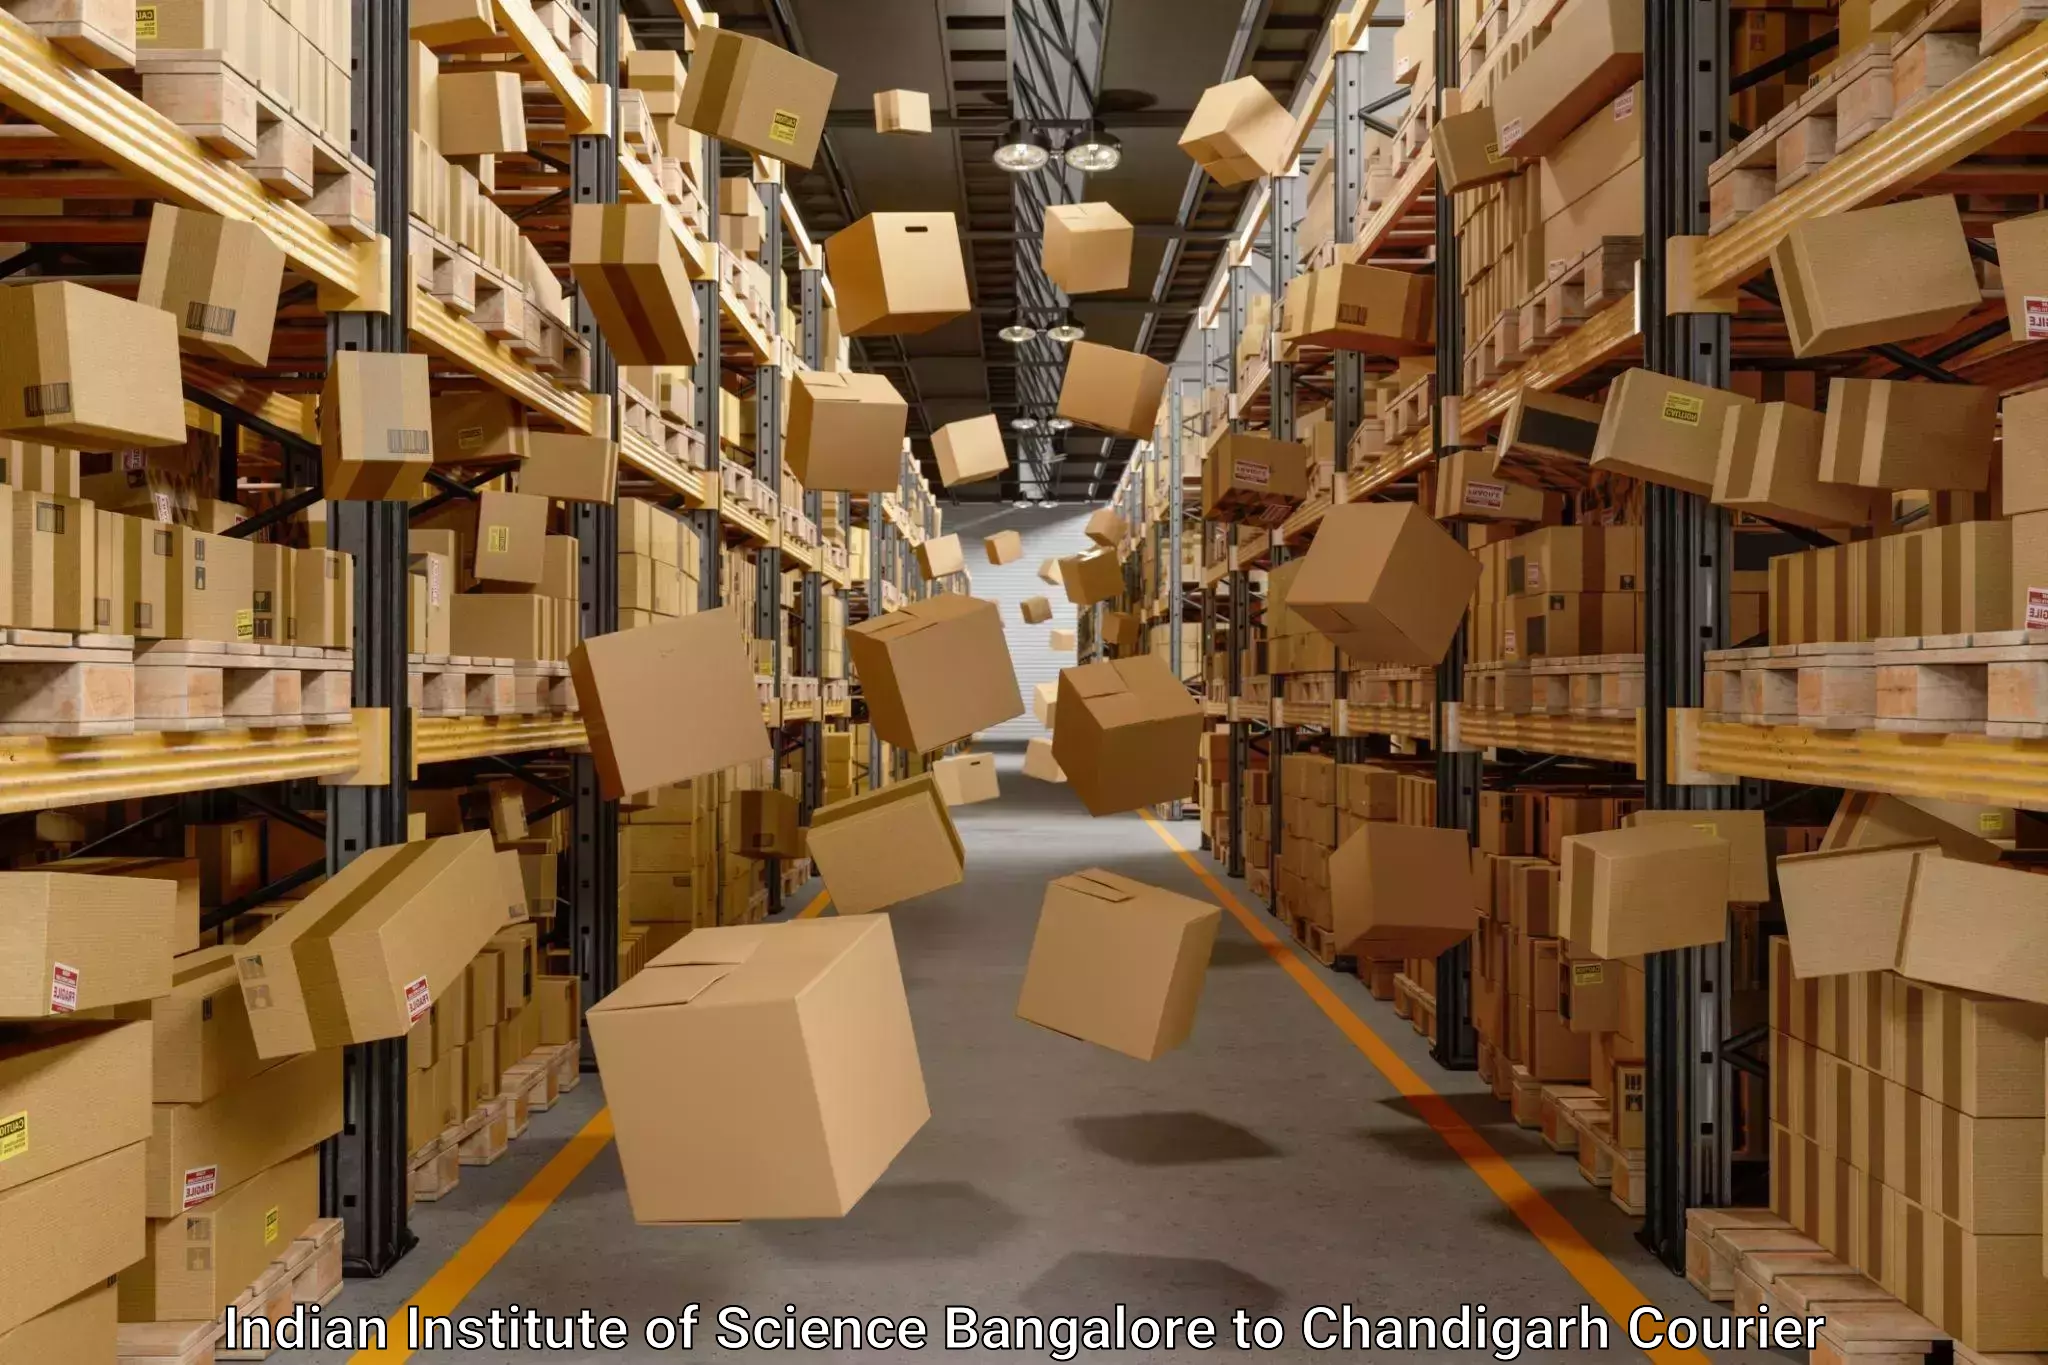 Furniture transport and logistics Indian Institute of Science Bangalore to Chandigarh